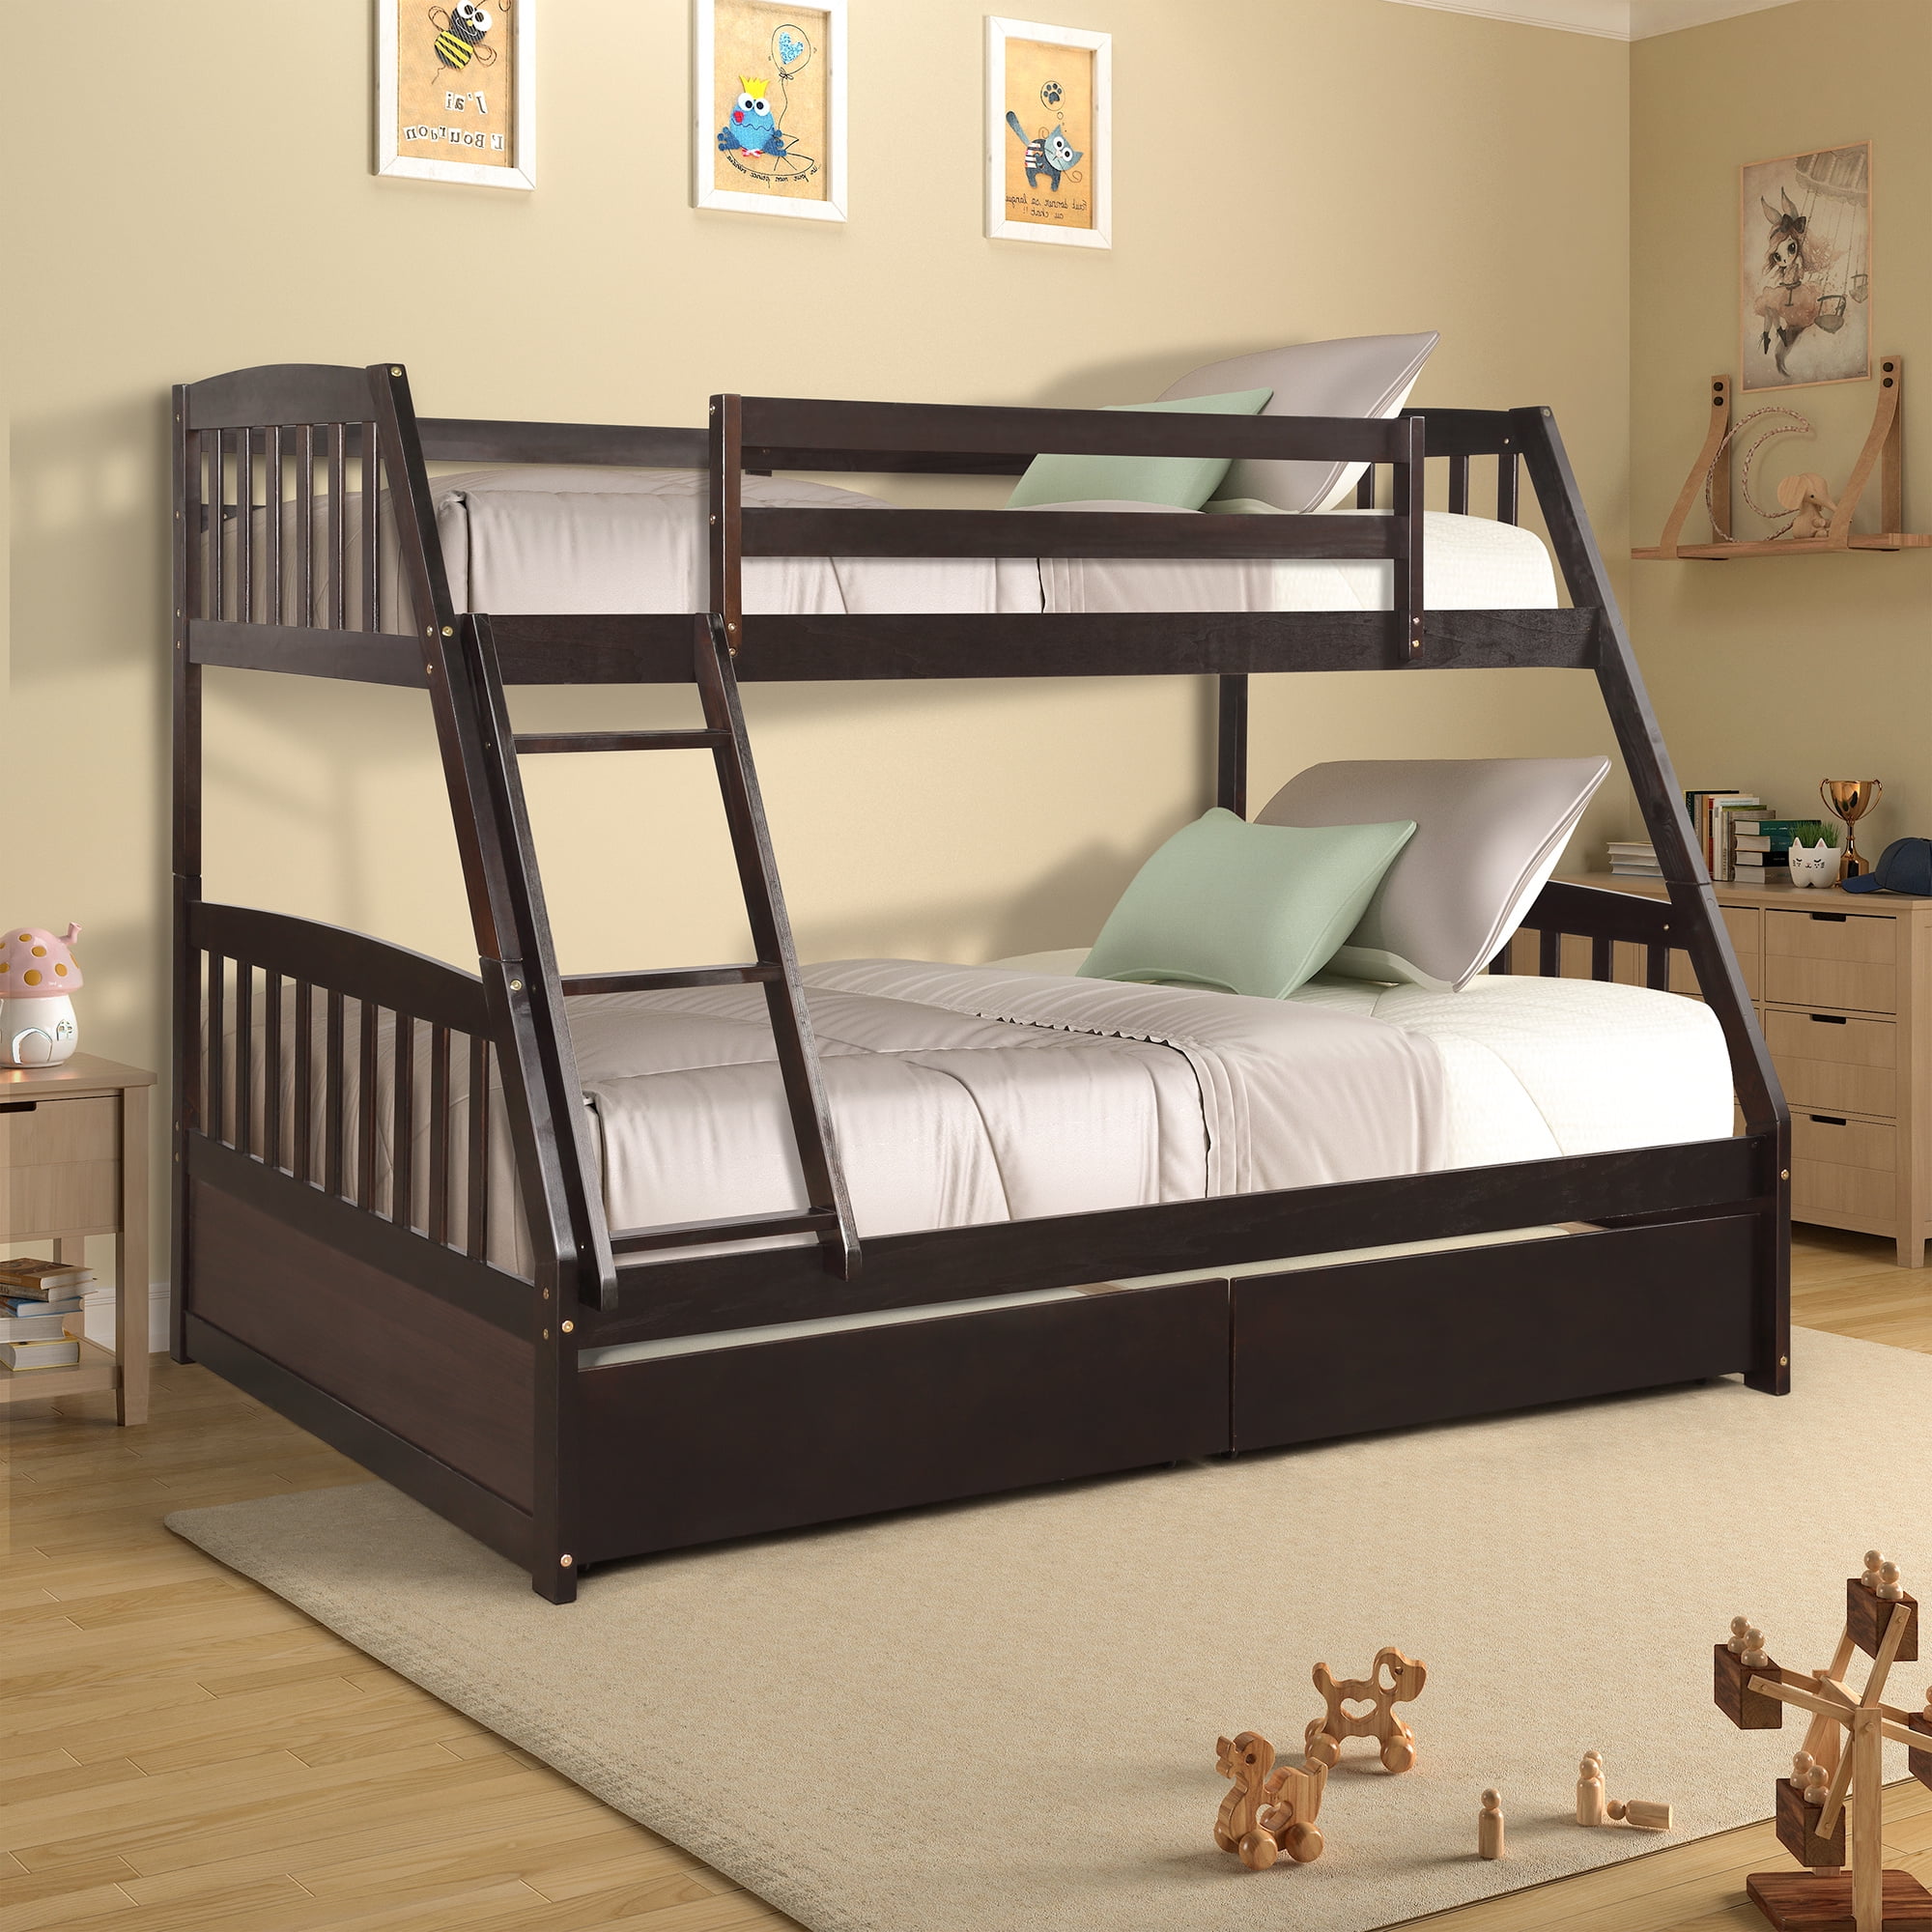 Solid Wood Bunk Bed Daybed No Box, Daybed Bunk Bed